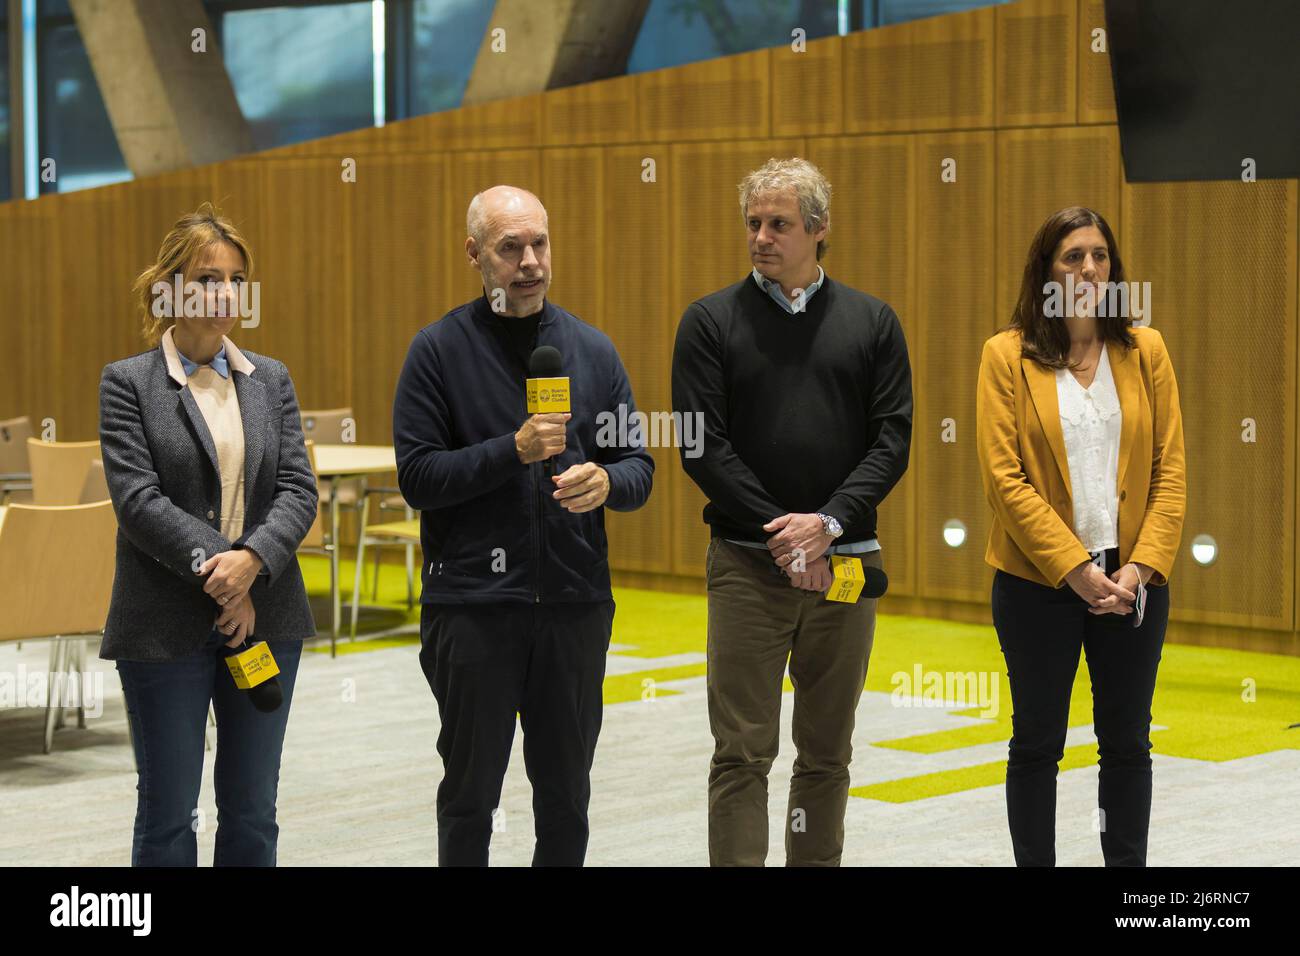 The Head of Government Horacio Rodríguez Larreta gave details about the work practices that began this year in public and private educational establishments for students who are in their last year of high school. (Photo by Esteban Osorio/Pacific Press) Stock Photo